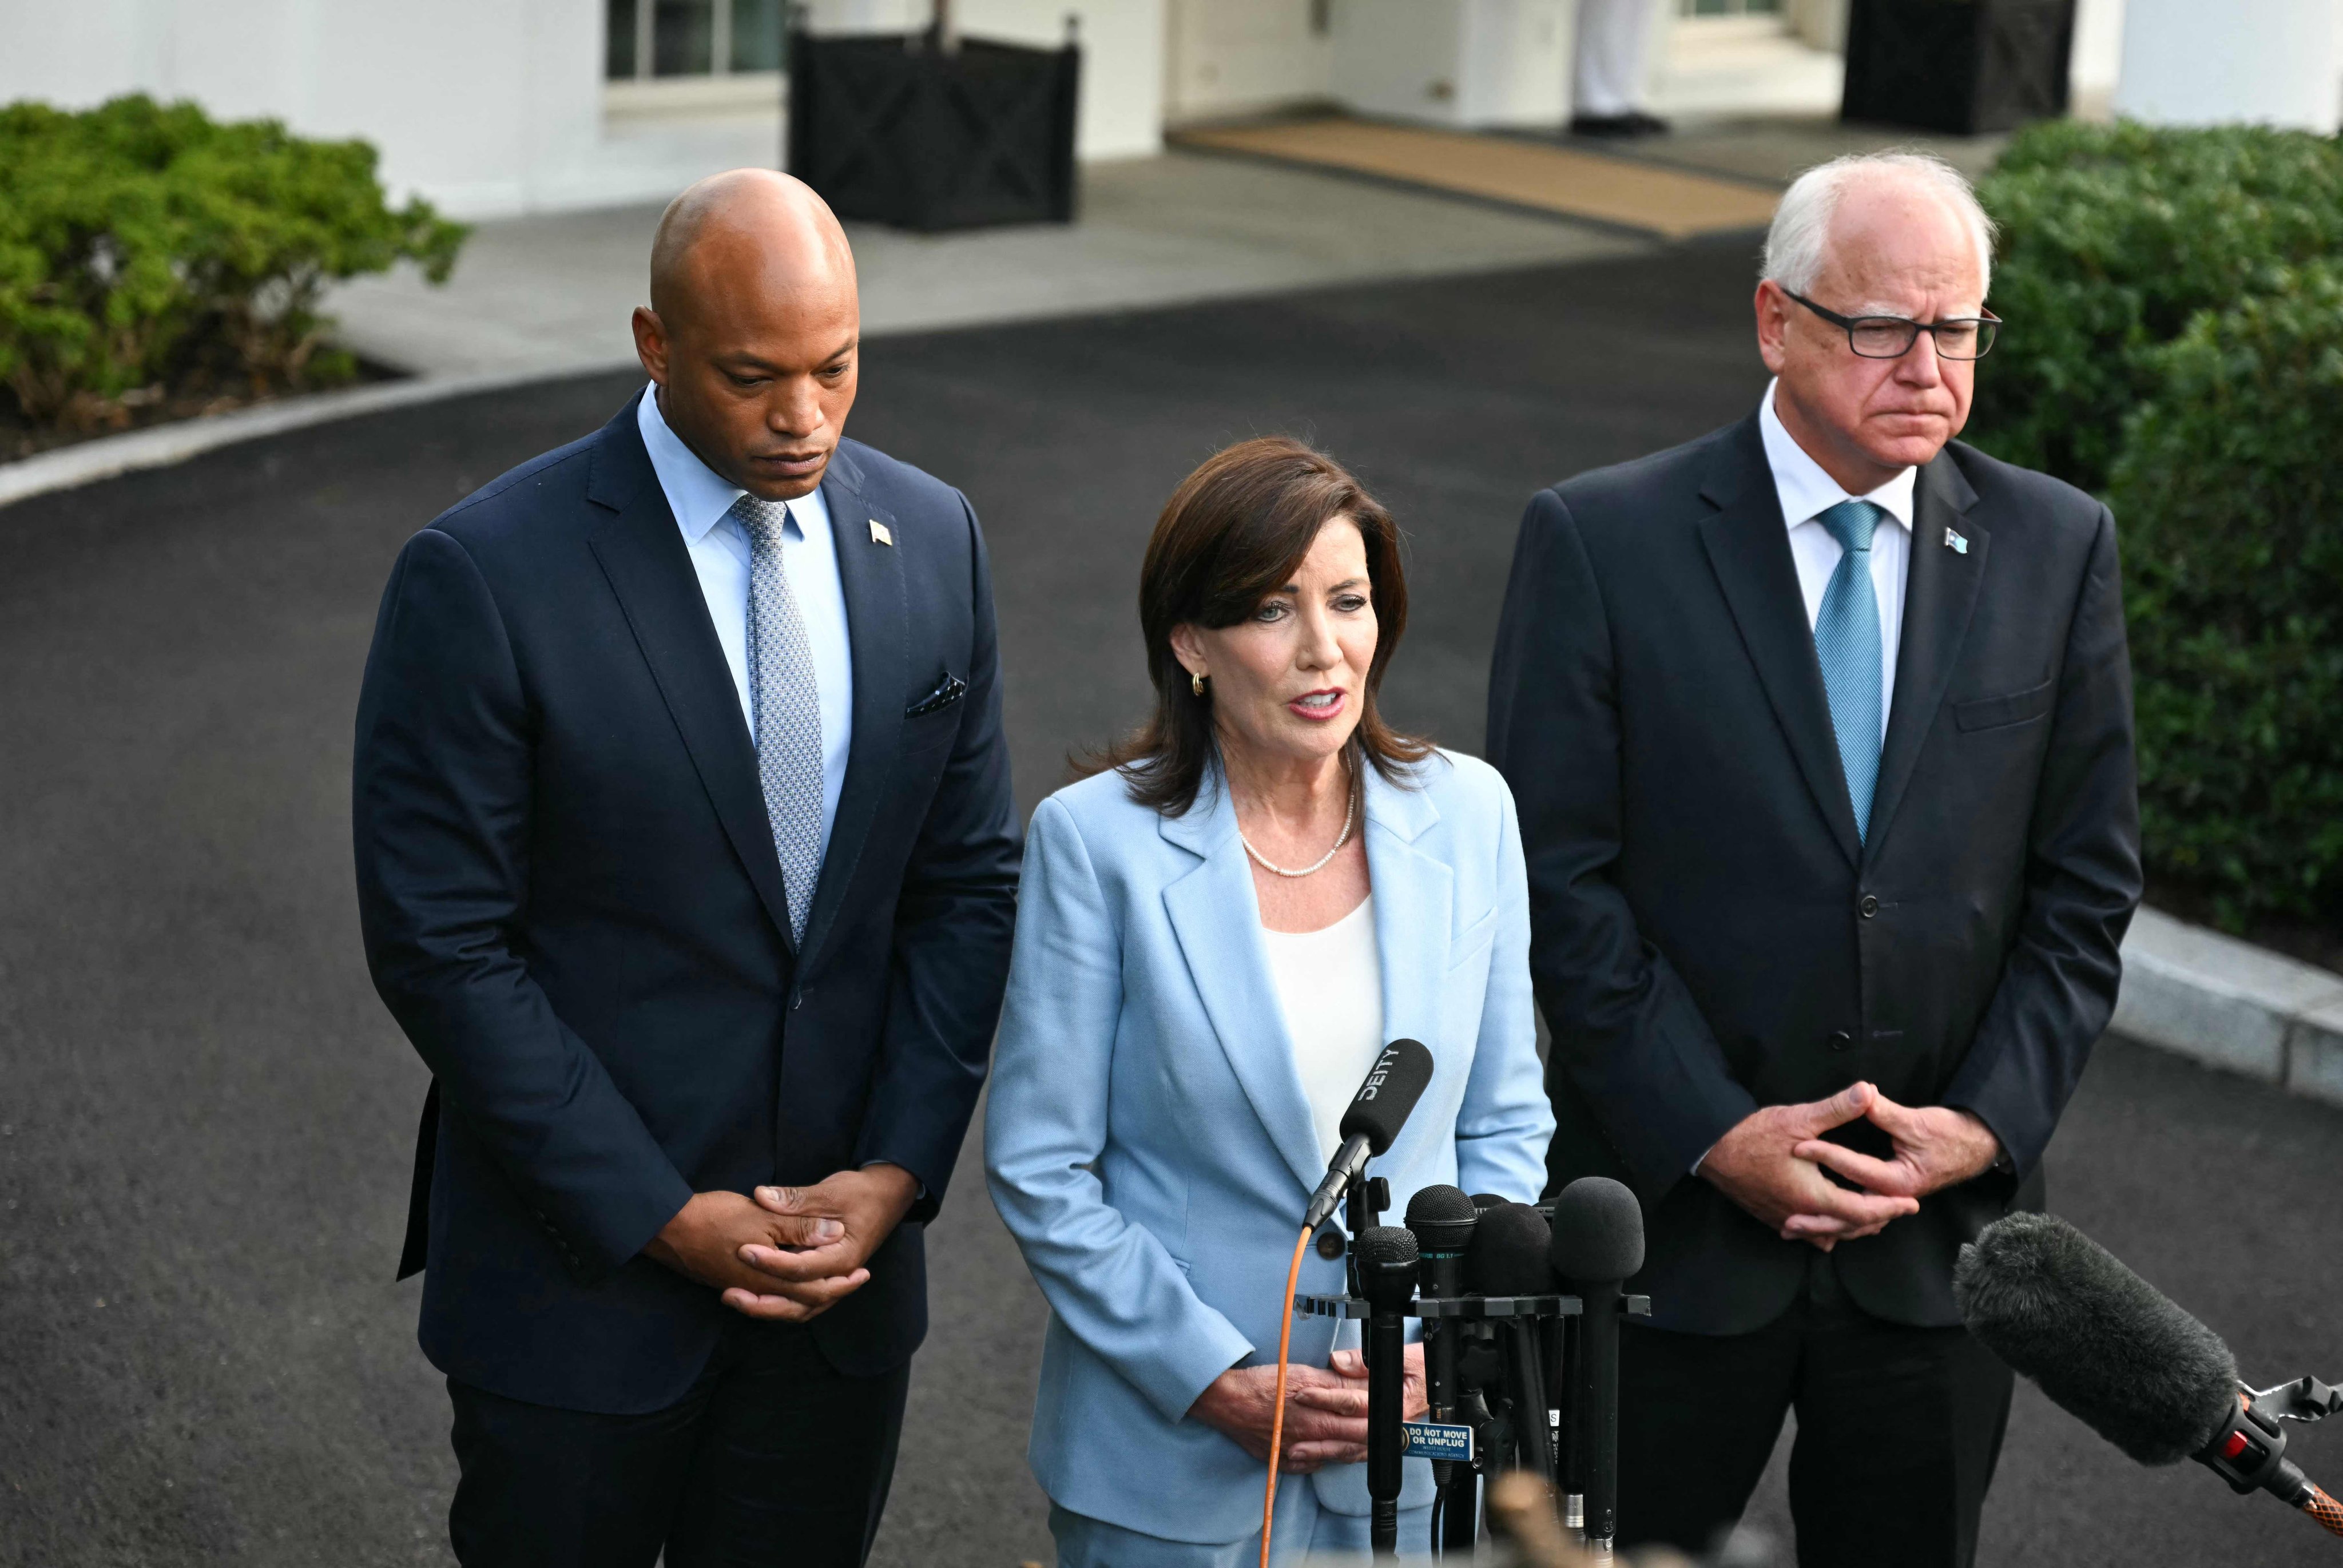 Left to righ: Wes Moore, governor of Maryland, Kathy Hochul, governor of New York, and Tim Walz, governor of Minnesota. Photo: AFP